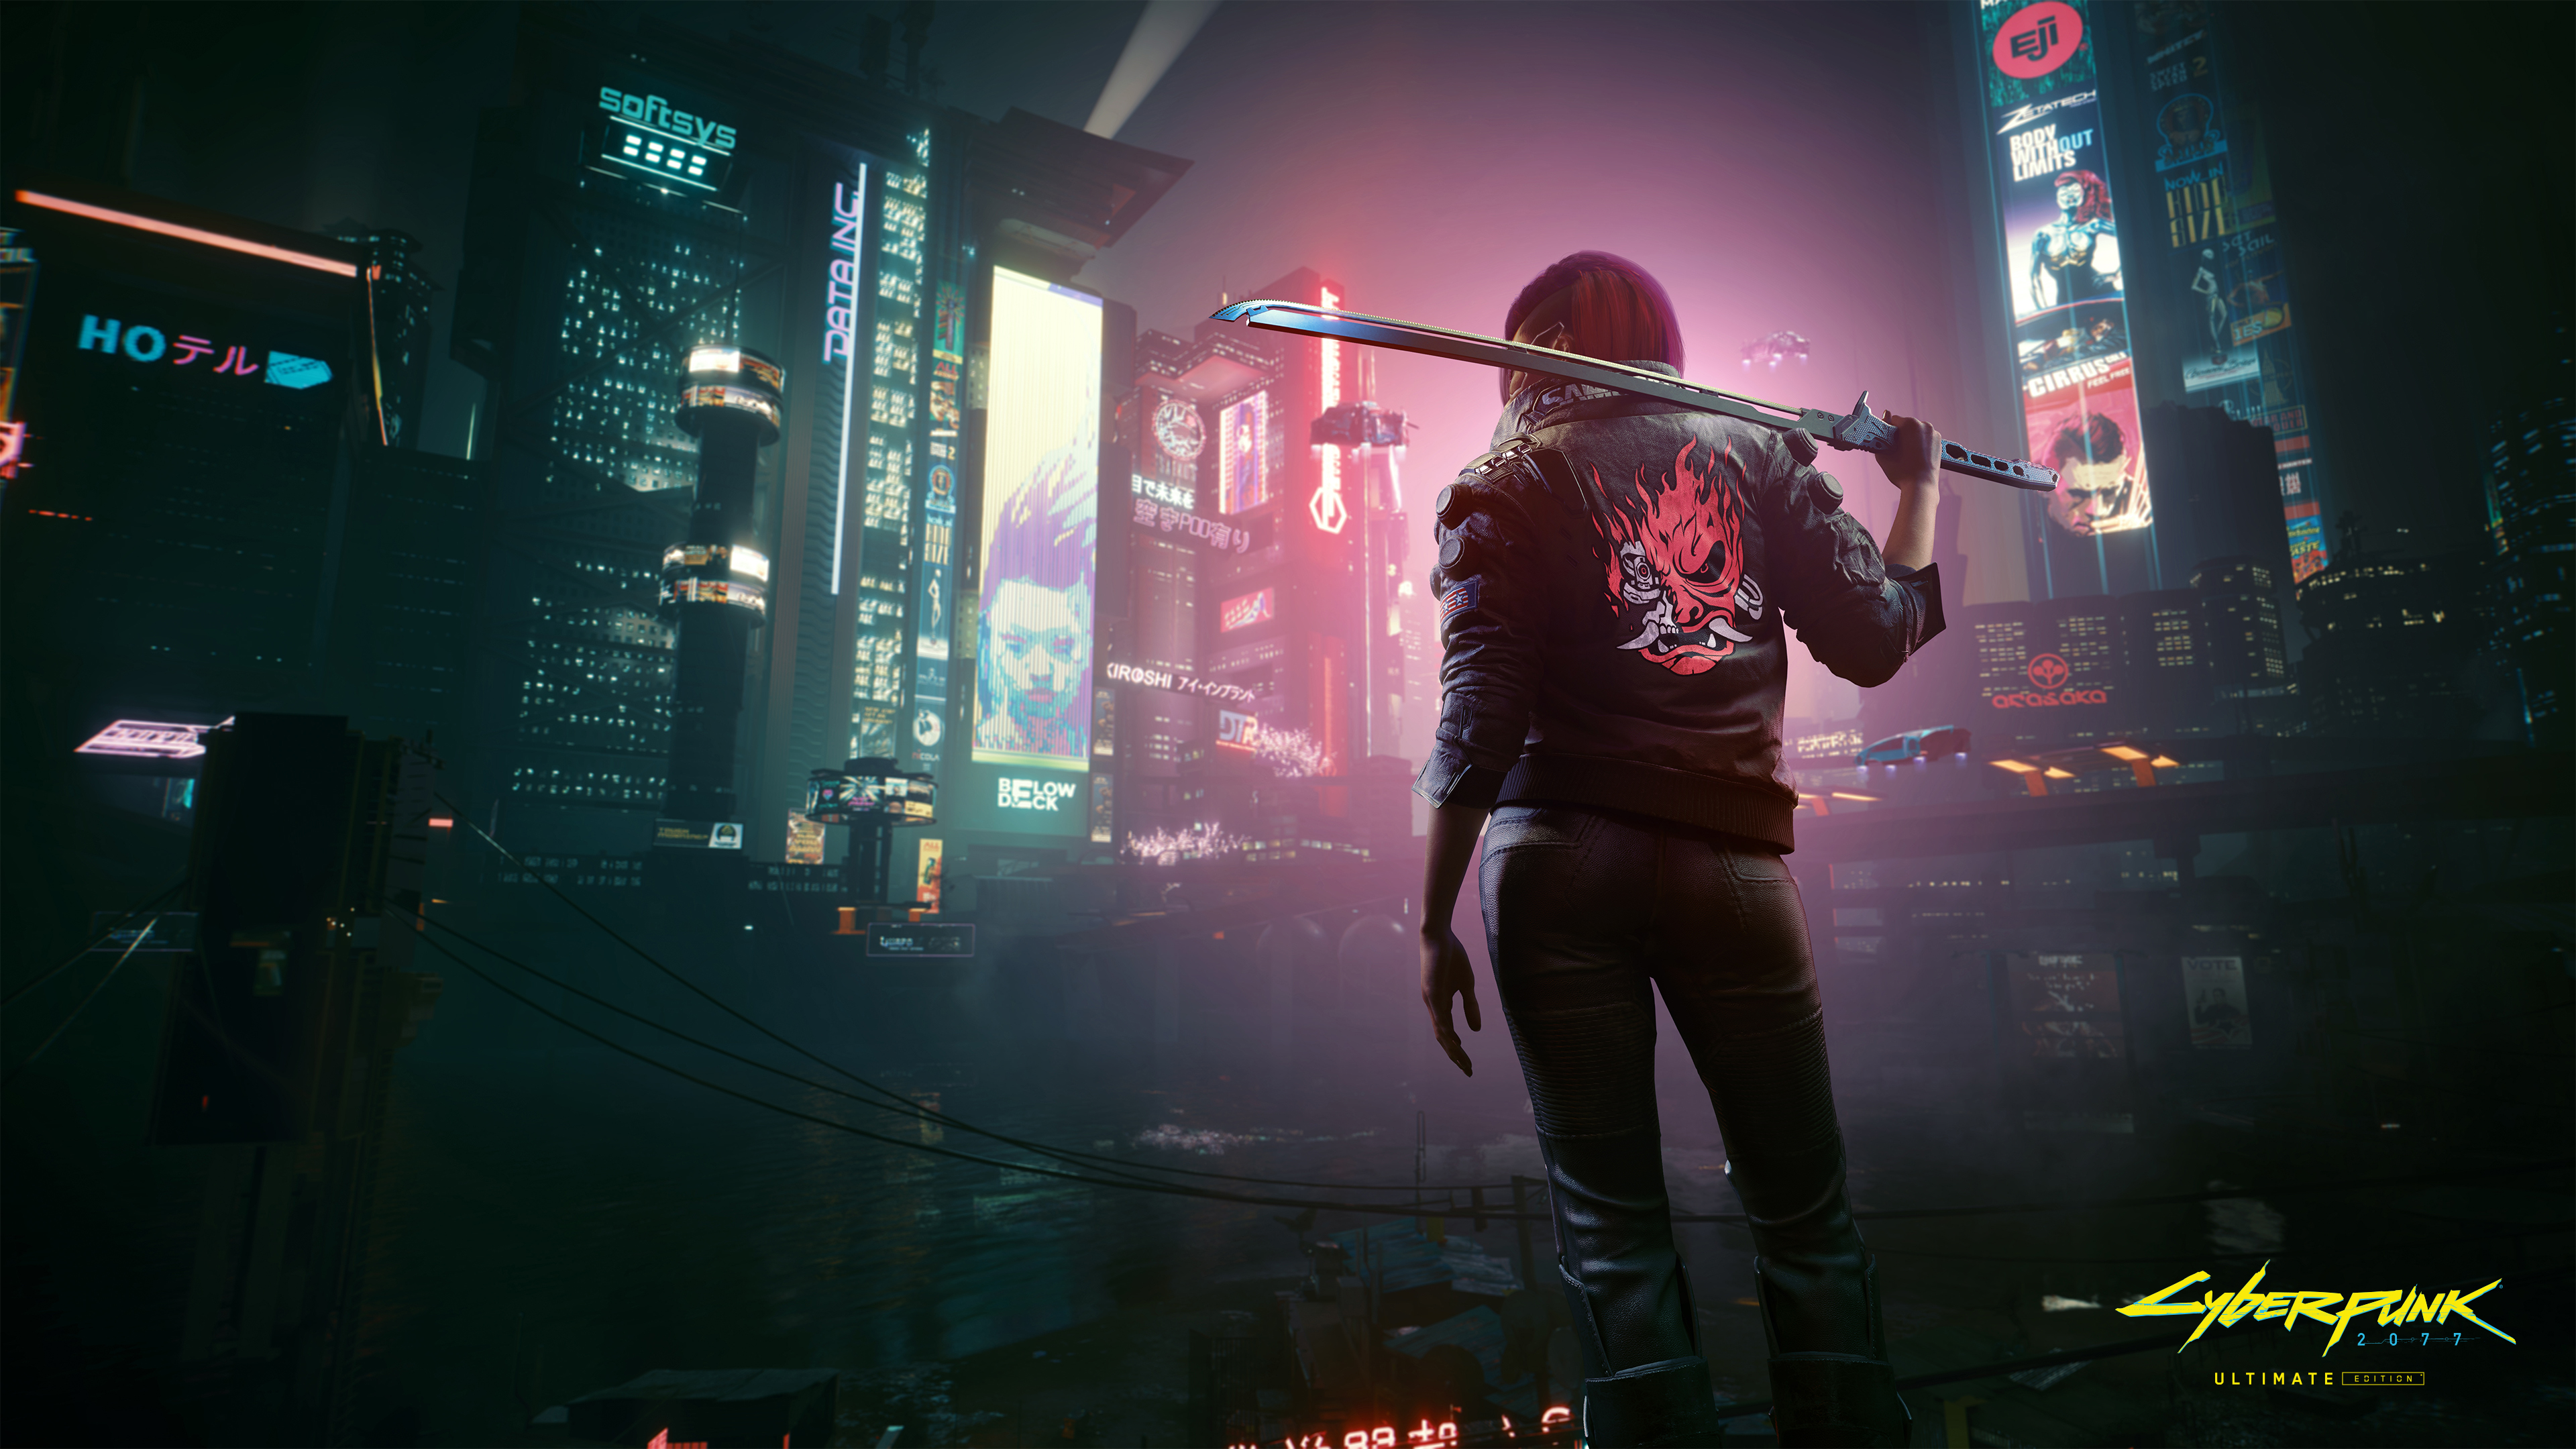 V (Cyberpunk 2077) wallpapers for desktop, download free V (Cyberpunk 2077)  pictures and backgrounds for PC